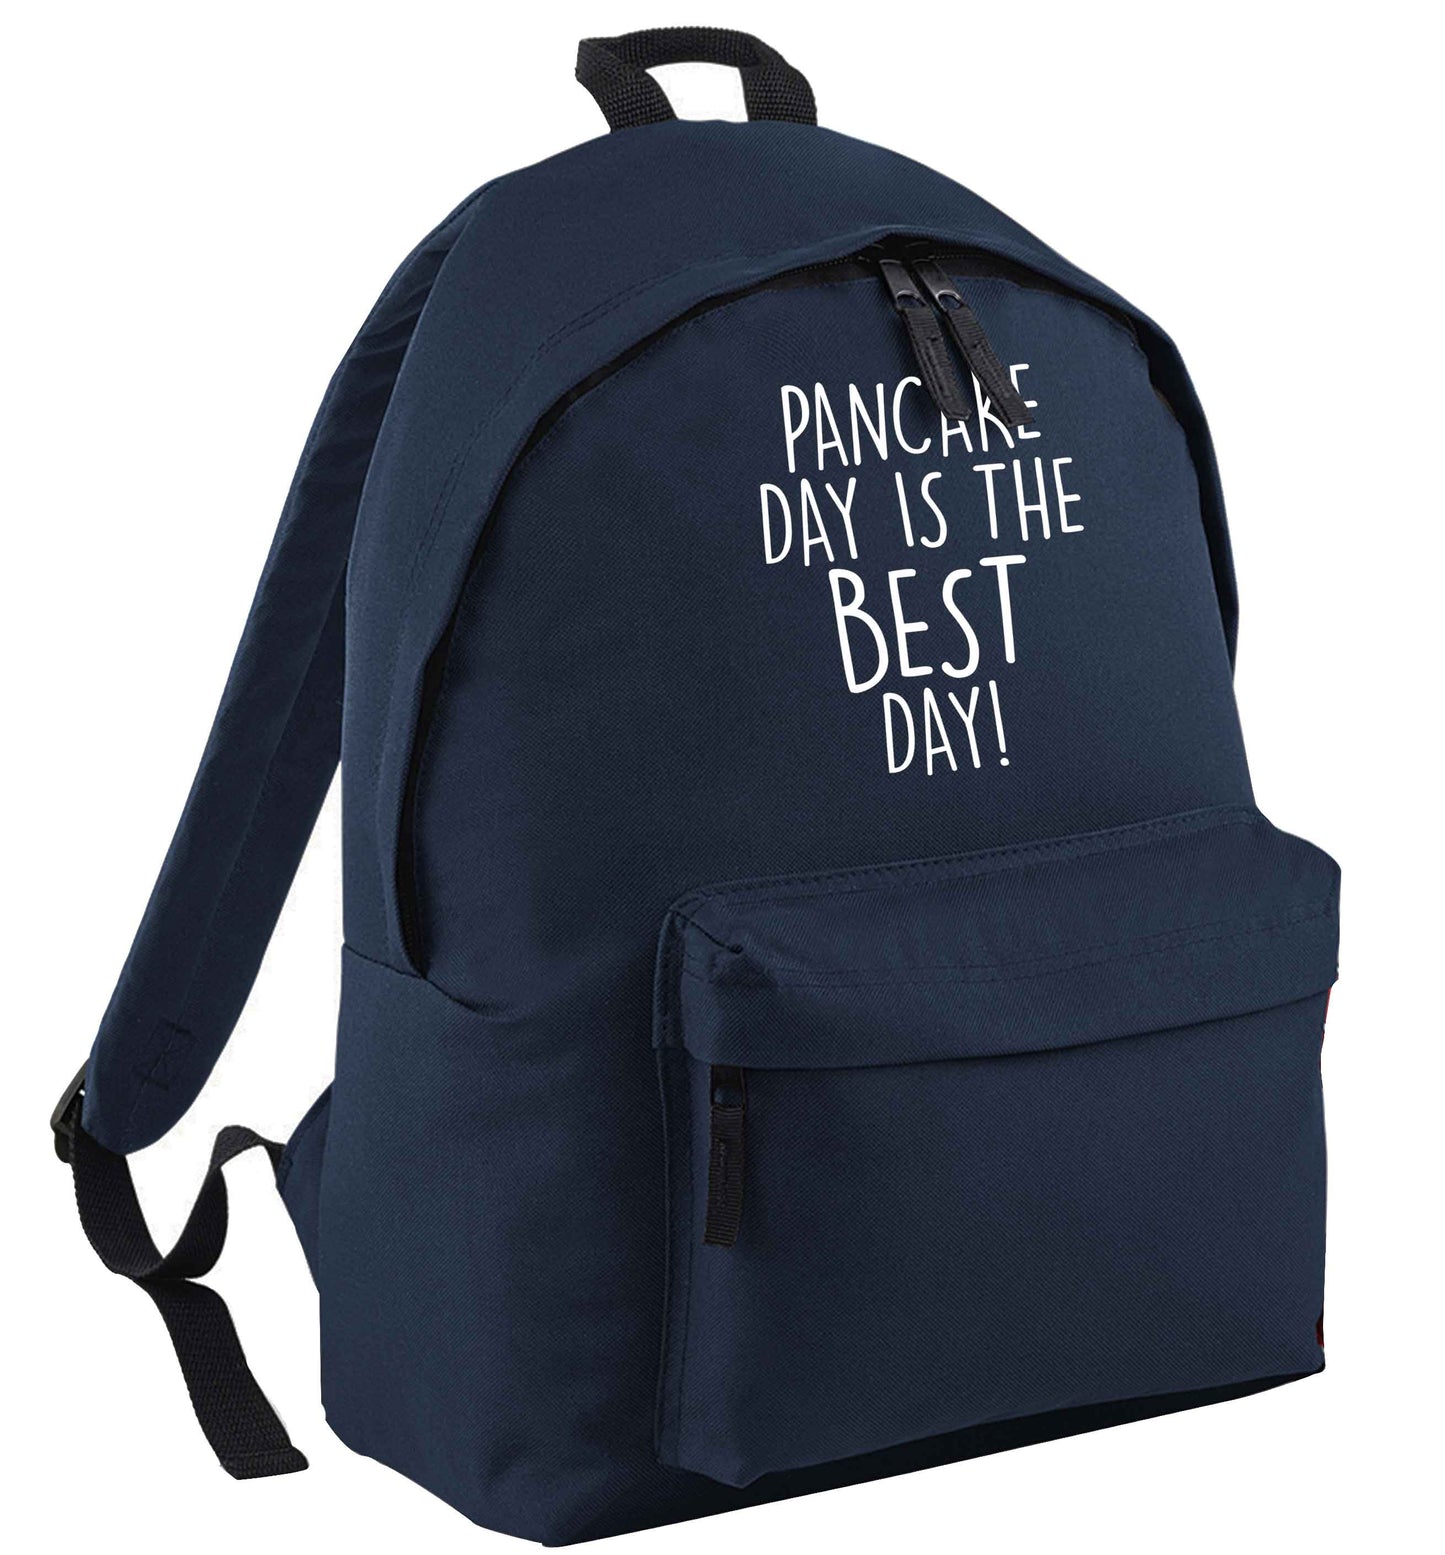 Pancake day is the best day navy childrens backpack